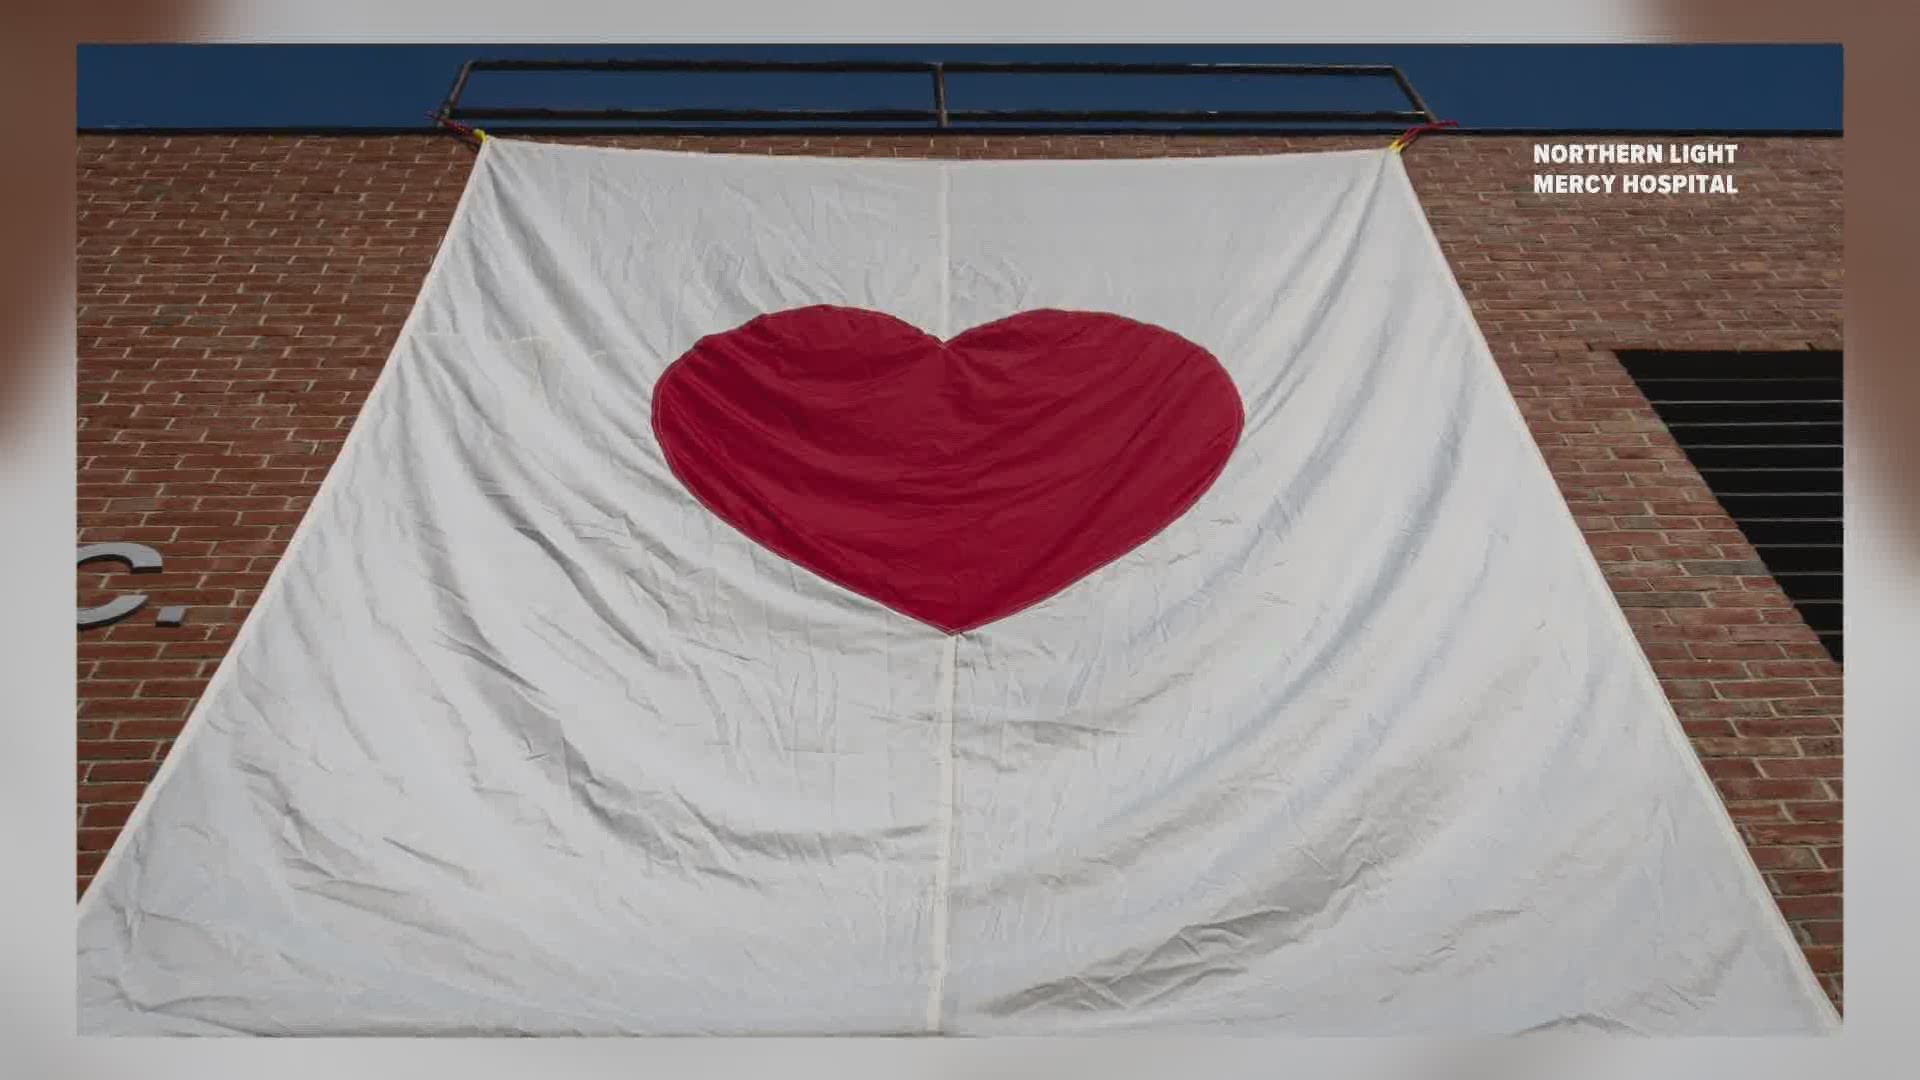 Two hospitals in Maine were hit by the Valentine bandit overnight, showing support for healthcare workers on the front lines of the coronavirus pandemic.